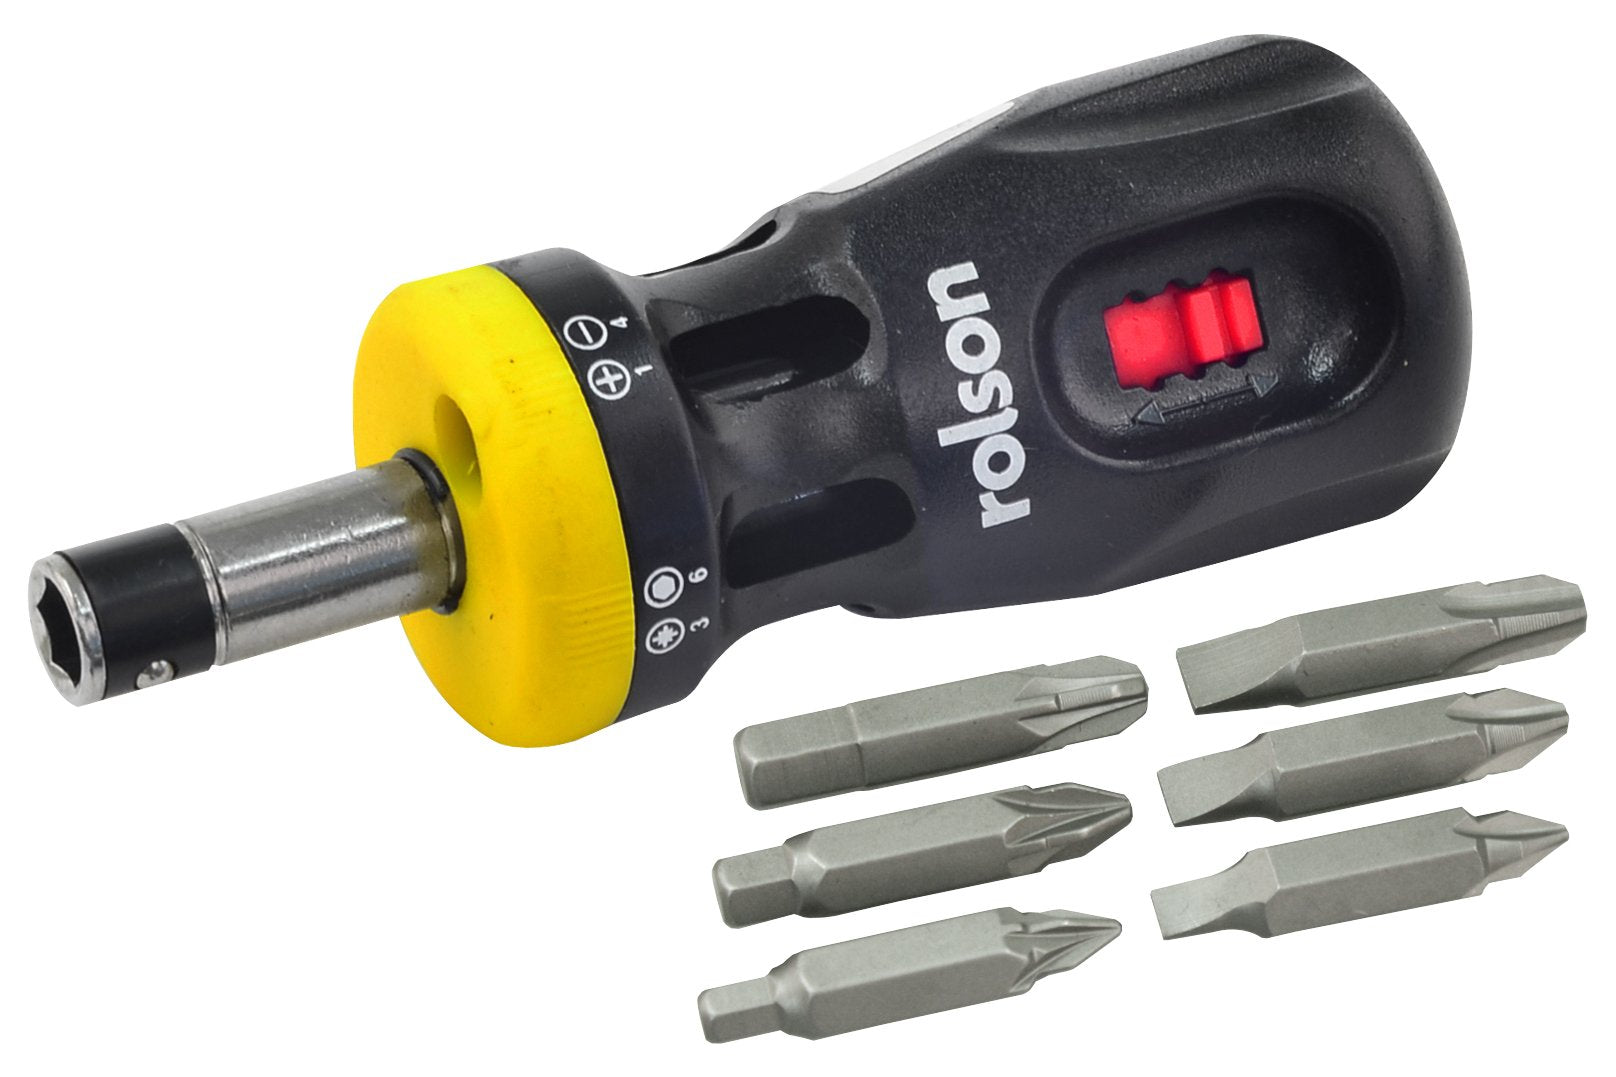 Rolson 28402 12-in-1 Stubby Screwdriver